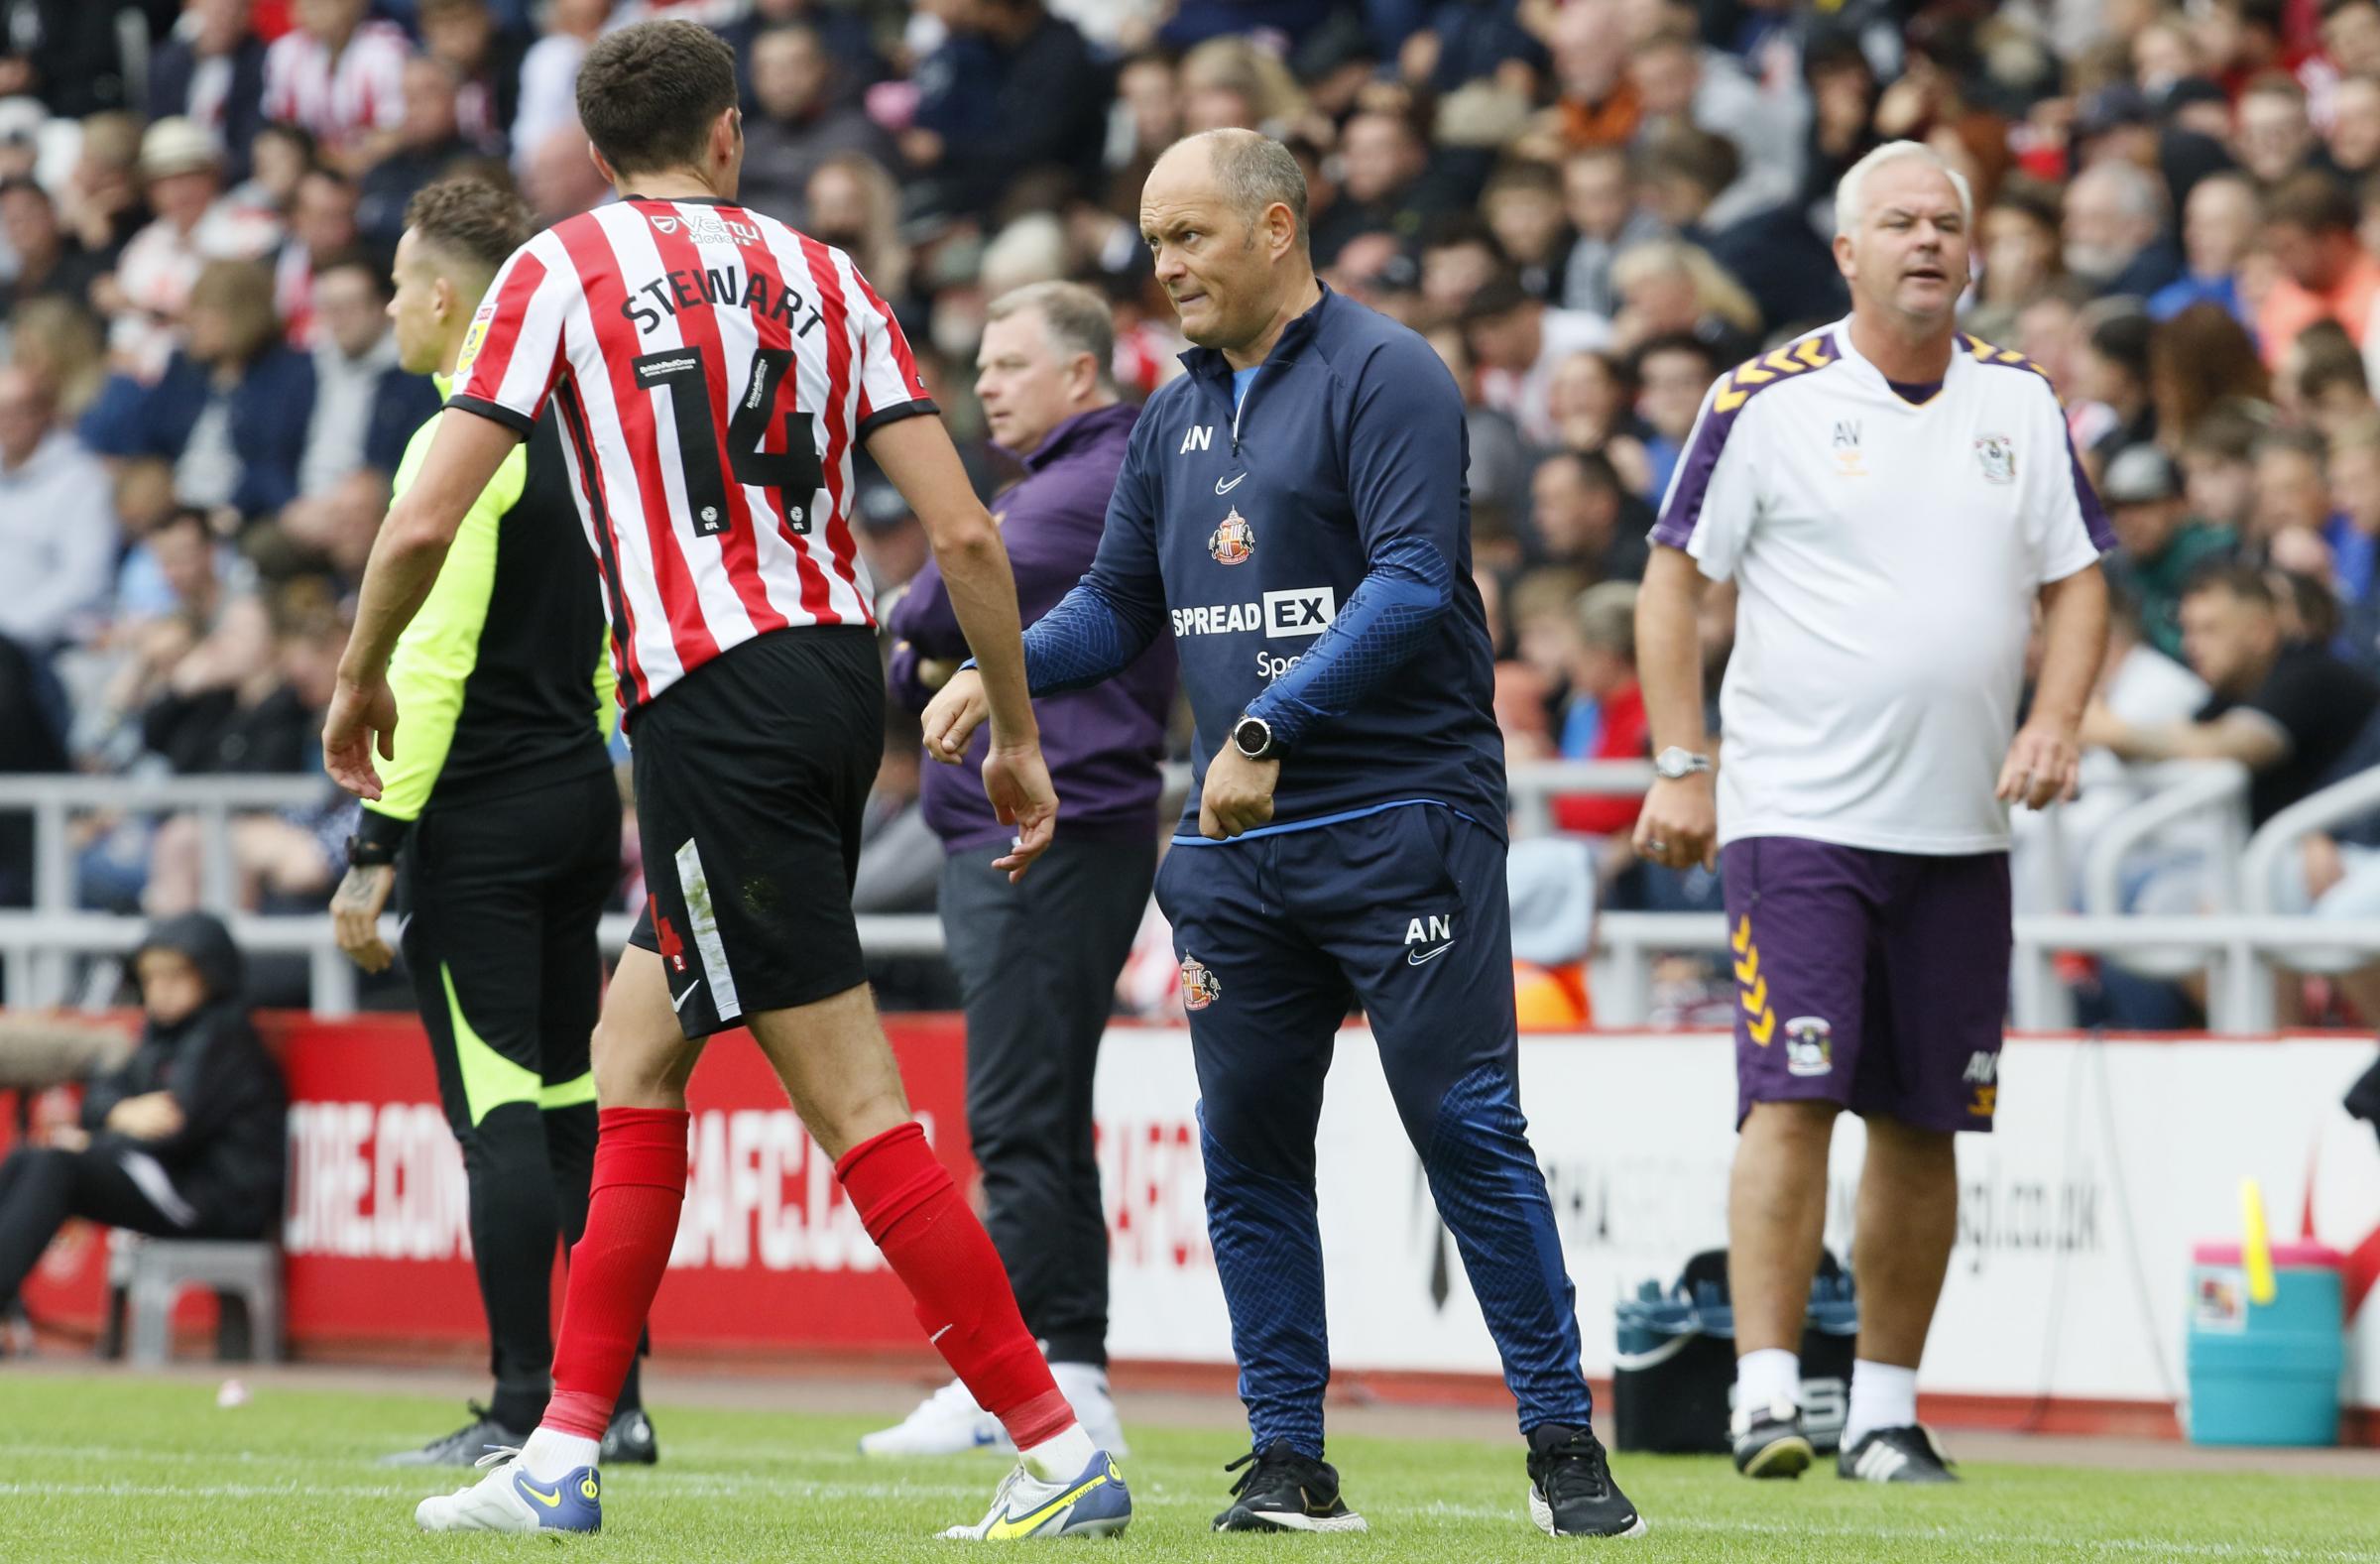 Alex Neil reacts to Sunderland's 1-1 draw with Coventry